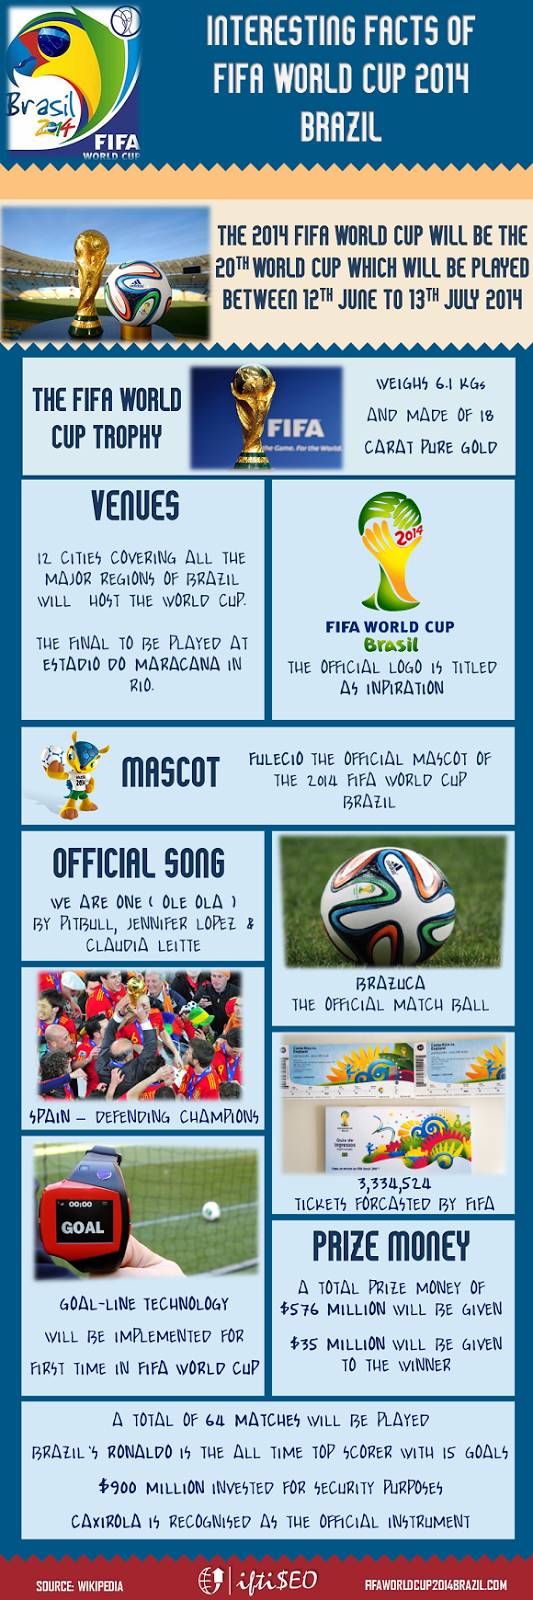 Interesting Facts of FIFA World Cup 2014 Brazil